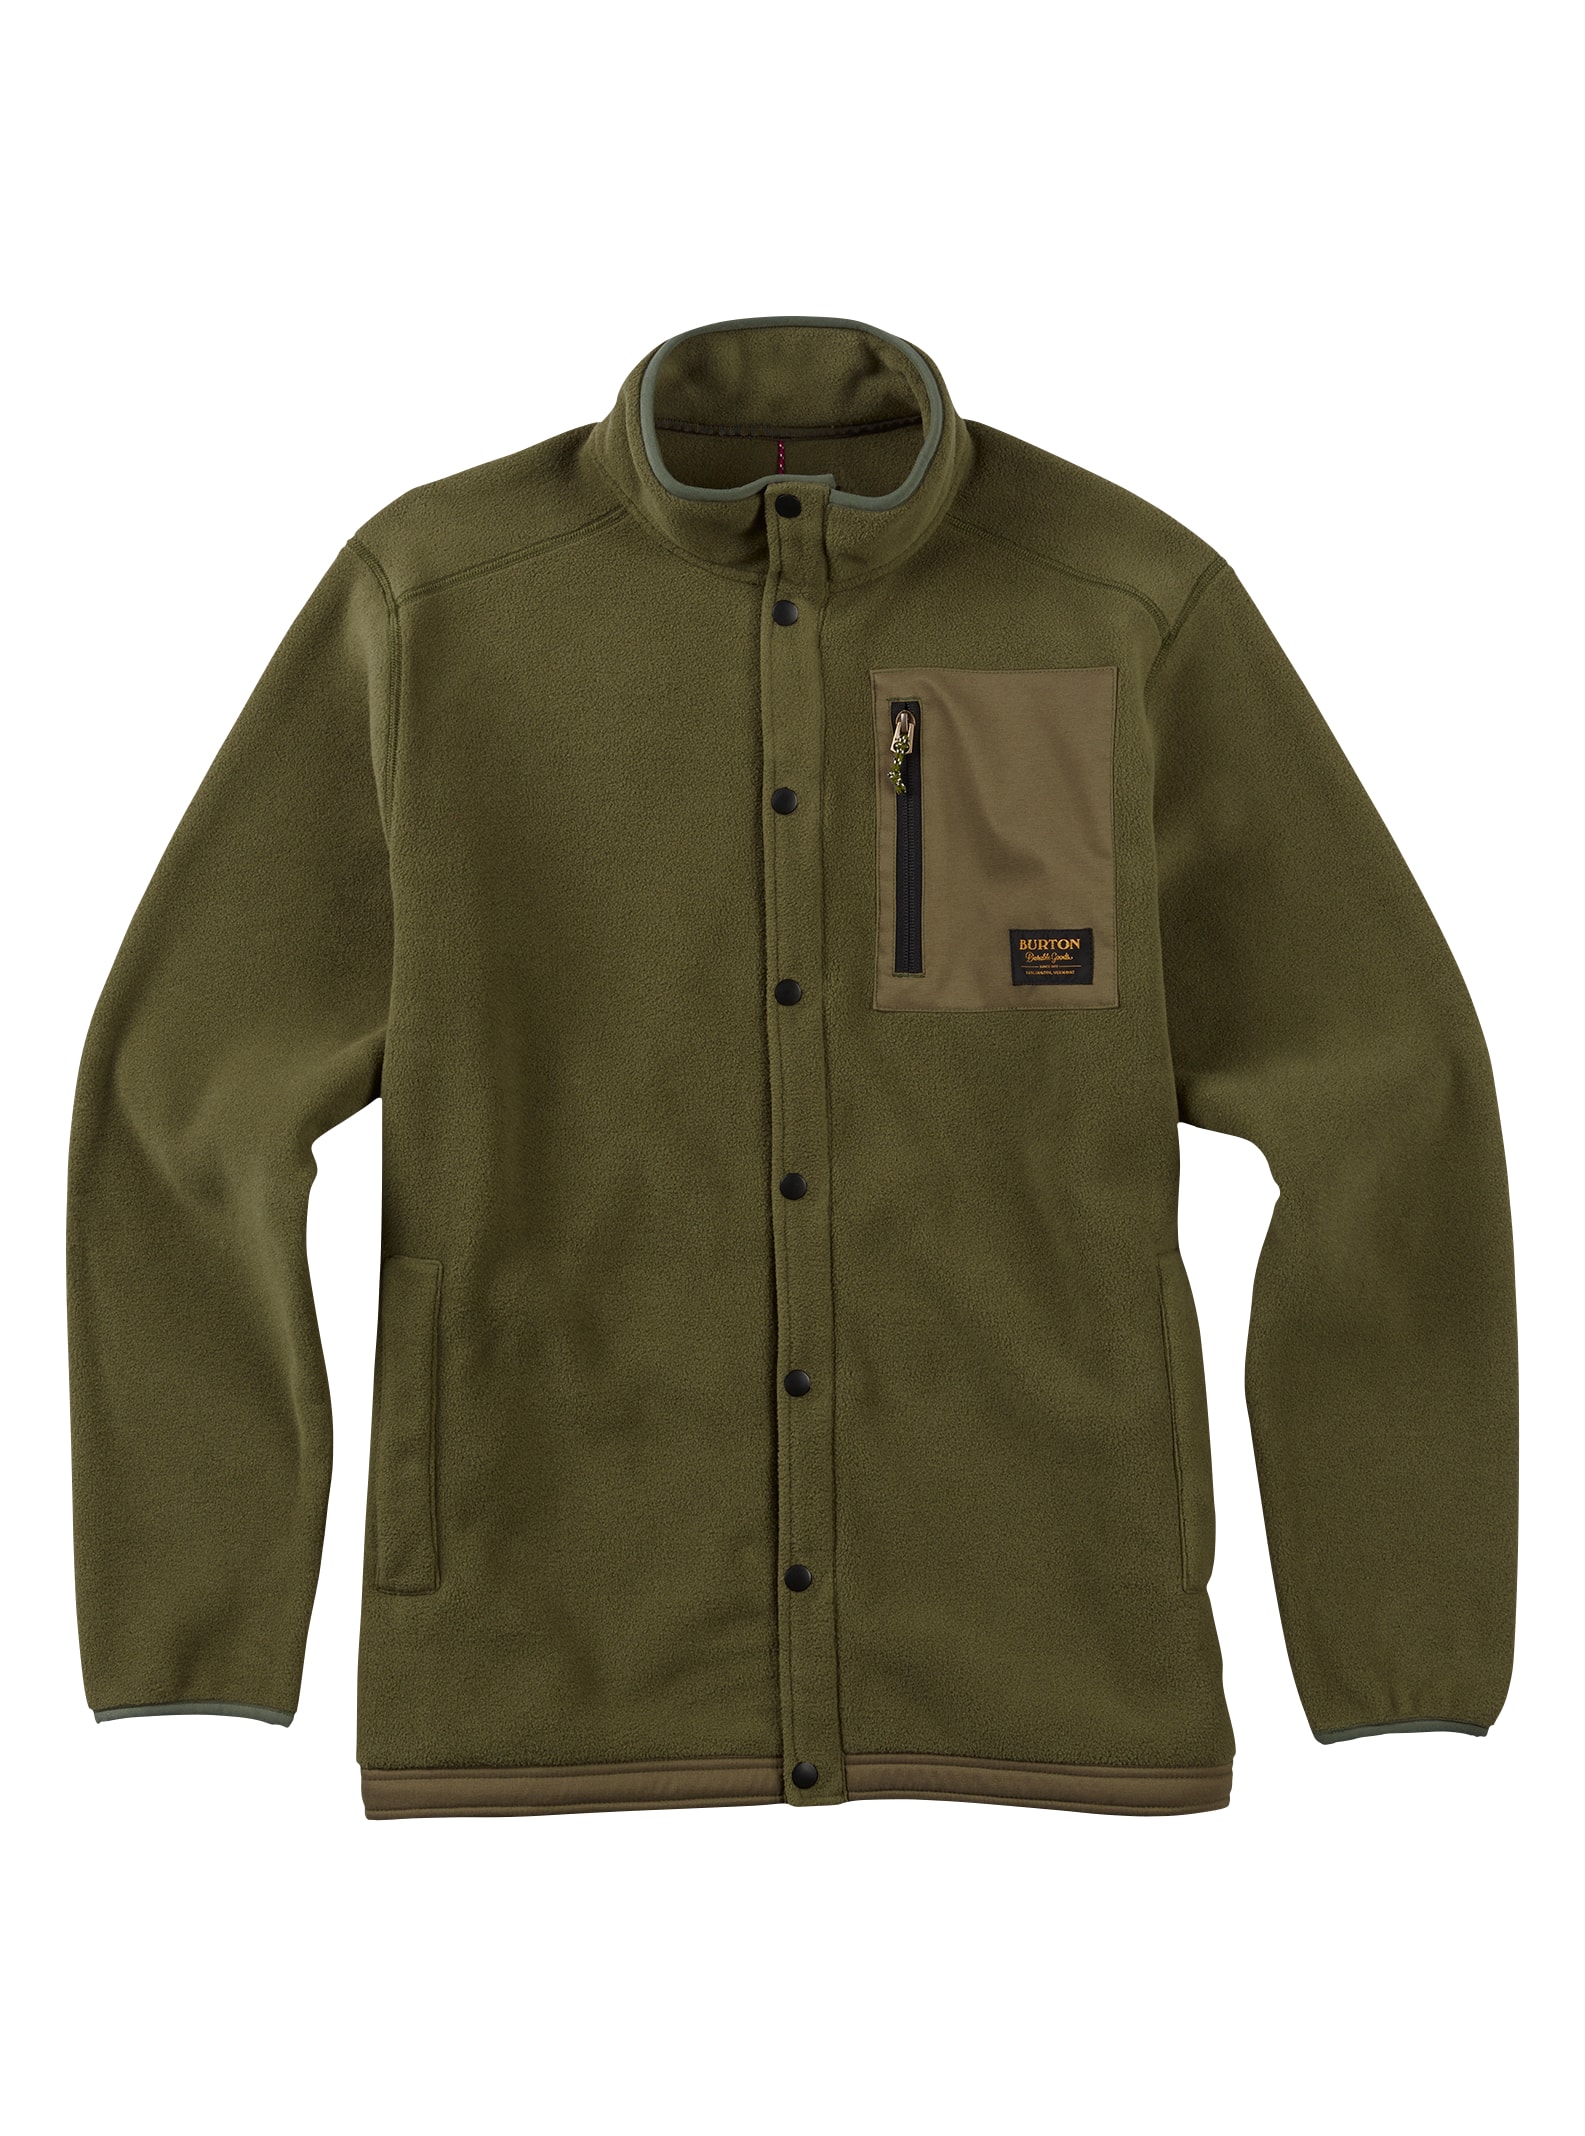 Burton – Polaire à boutons pression Hearth homme, Olive Night, M